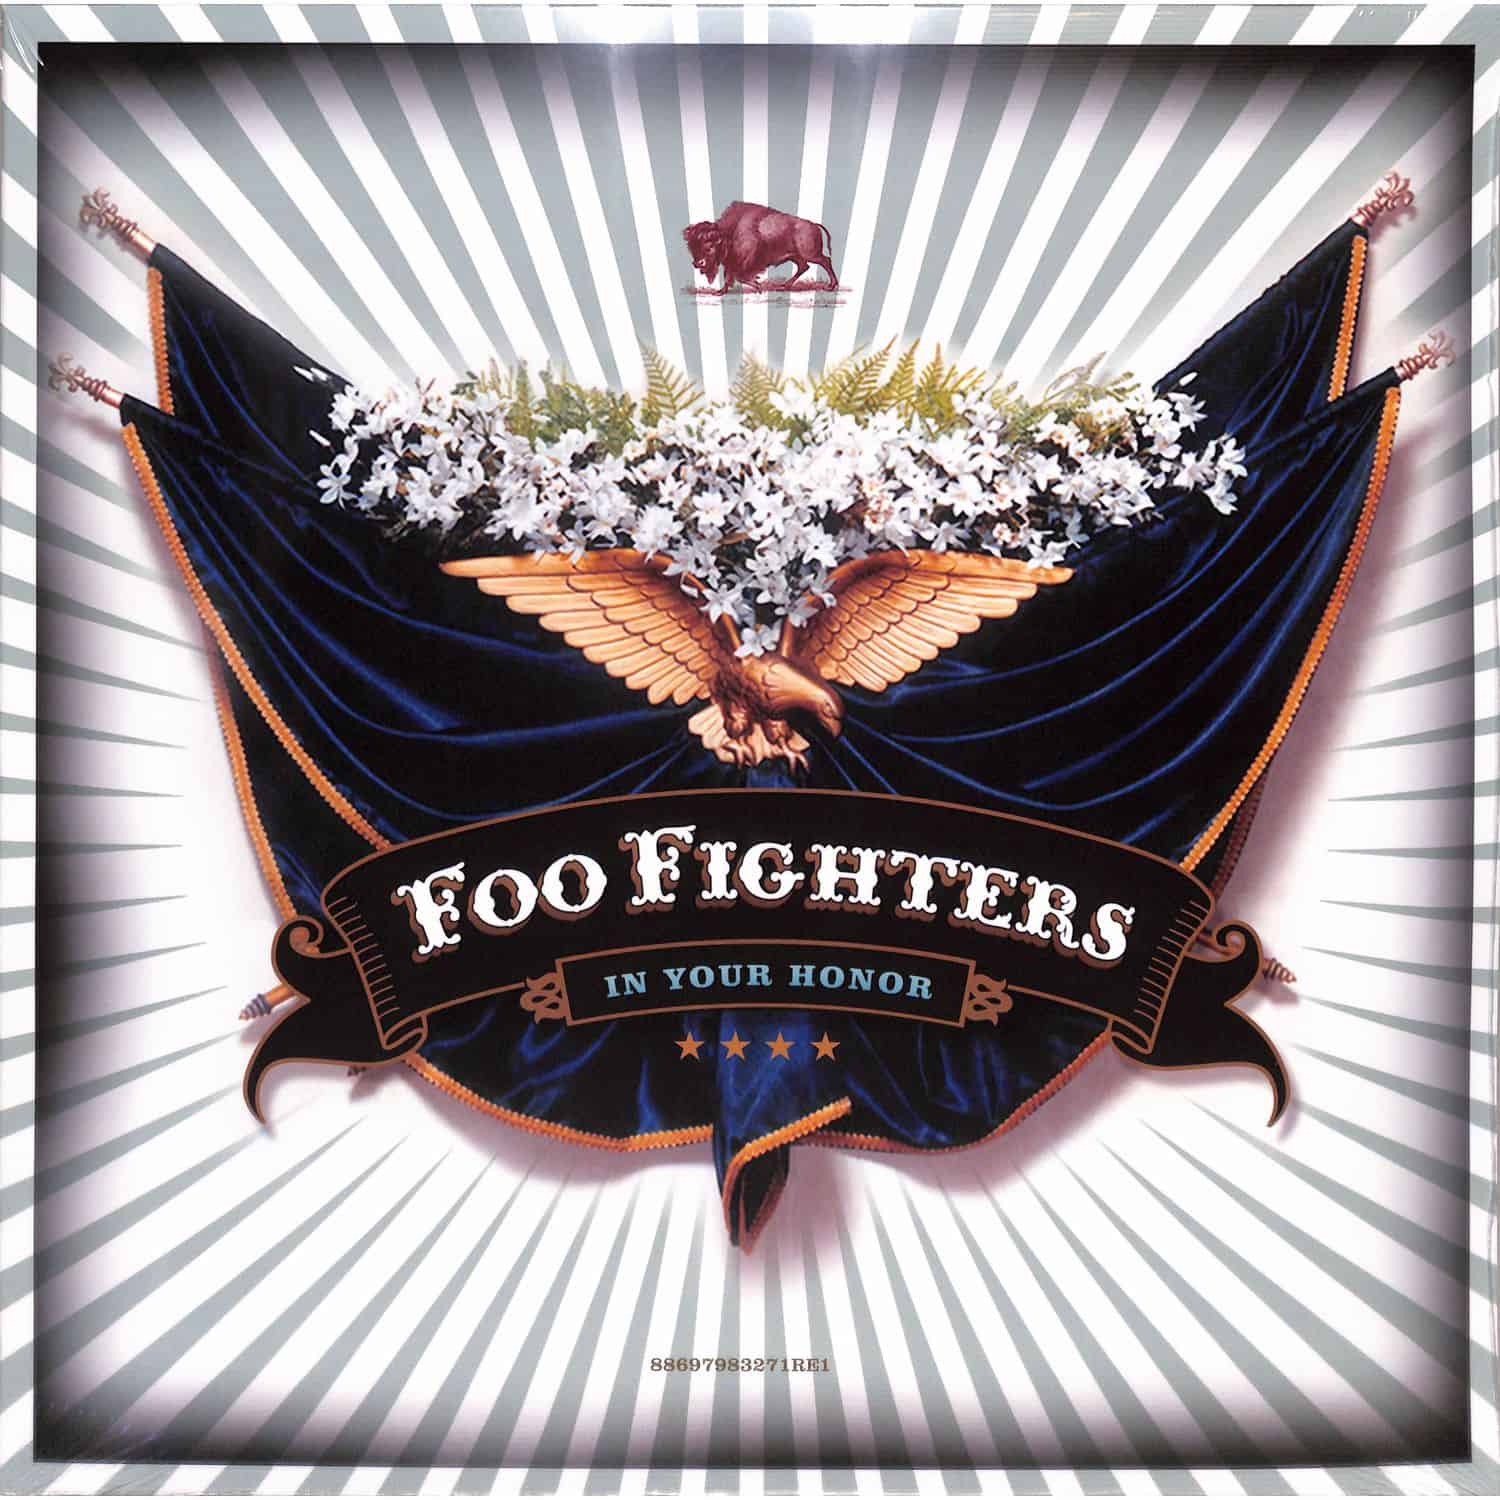 Foo Fighters - IN YOUR HONOR 